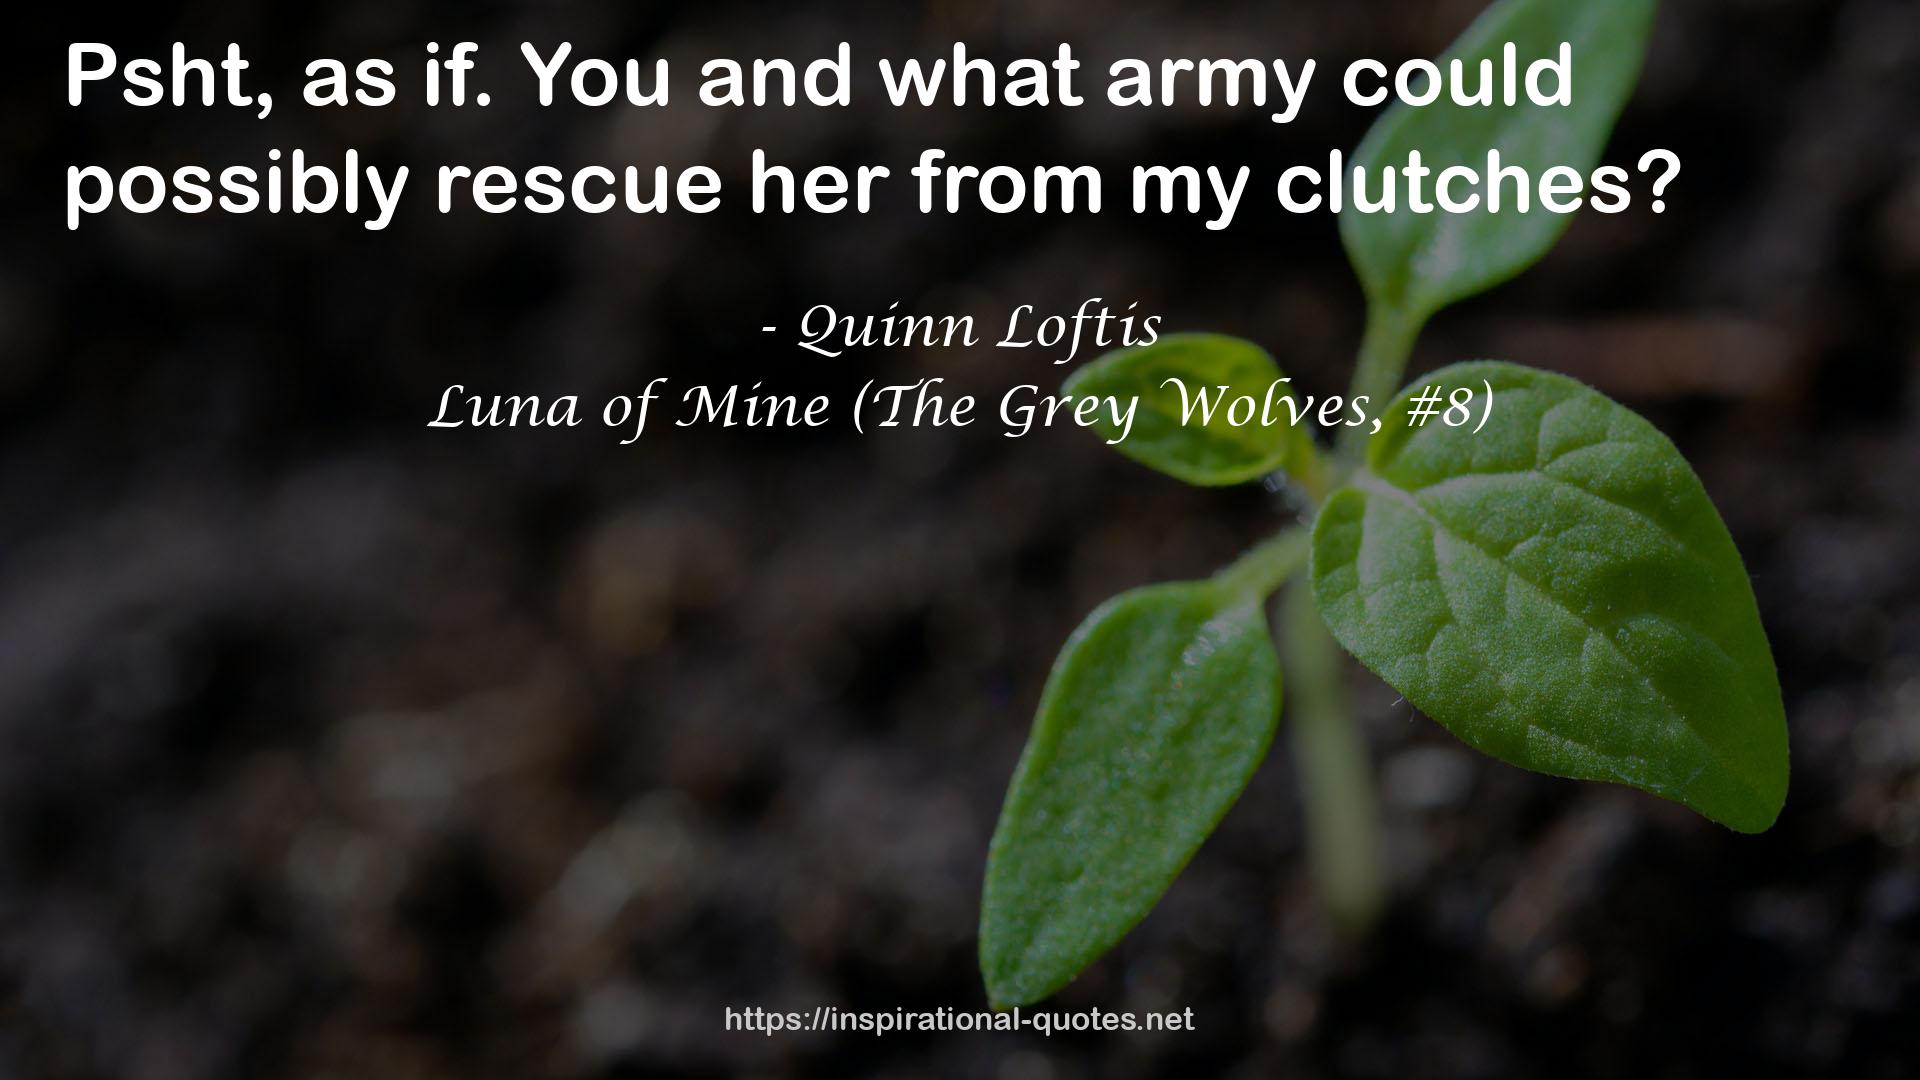 Luna of Mine (The Grey Wolves, #8) QUOTES